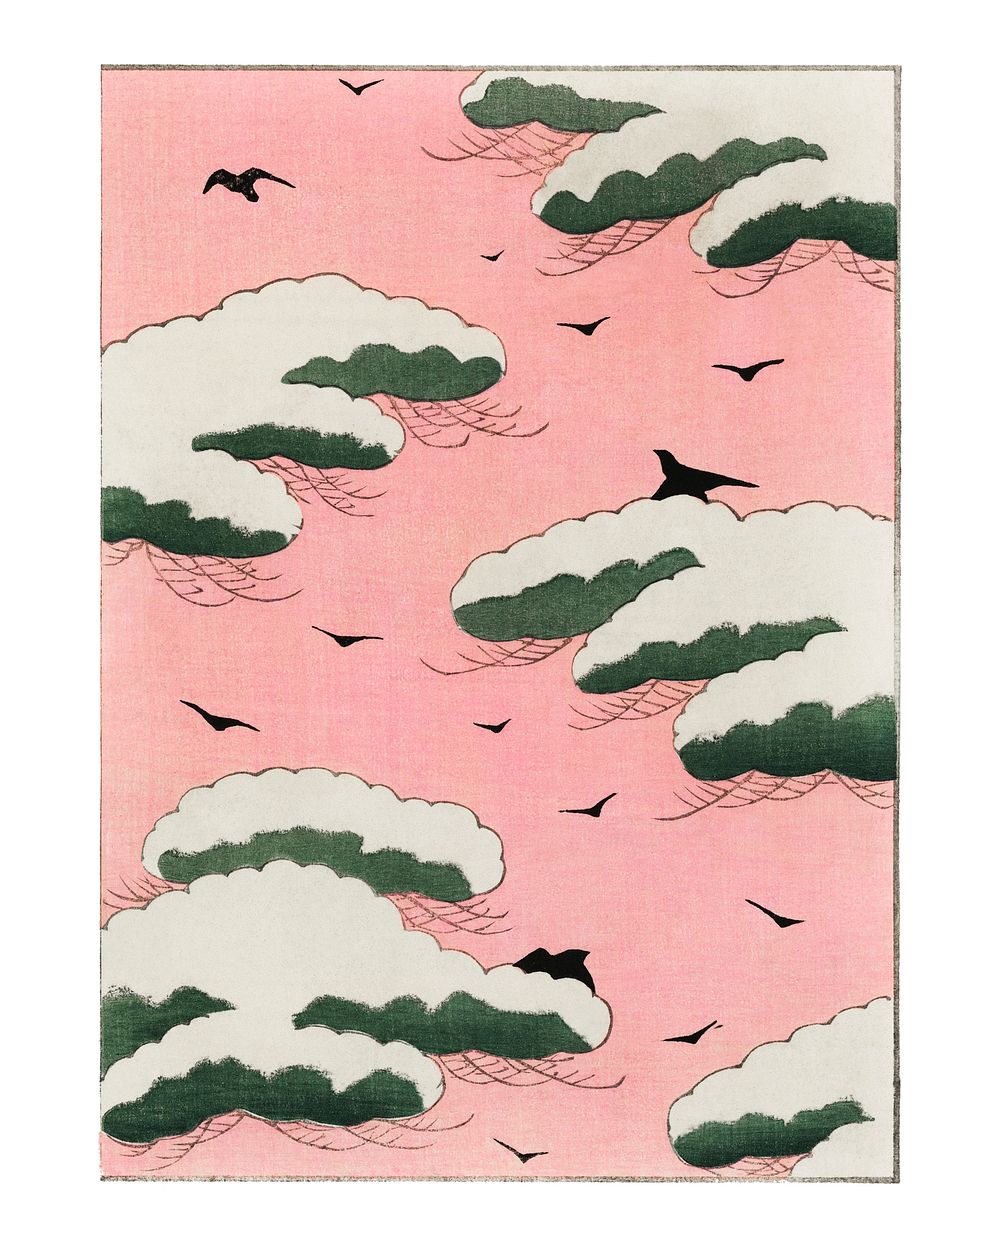 Pink sky vintage illustration by Watanabe Seitei. Digitally enhanced by rawpixel.